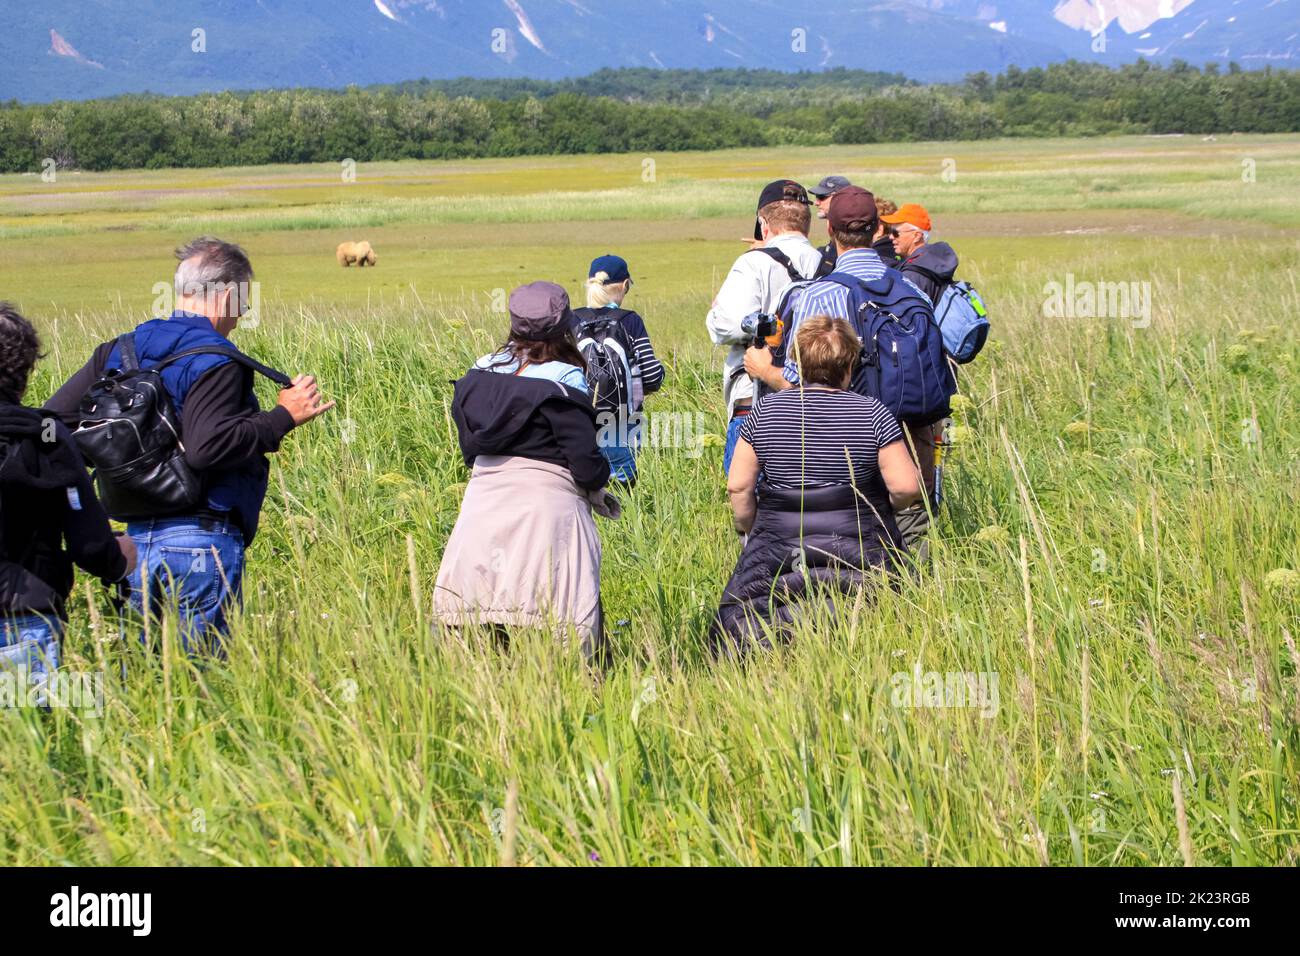 A group of tourists during a Guided Wilderness Bear viewing tour at Katmai National Park, Alaska. Stock Photo